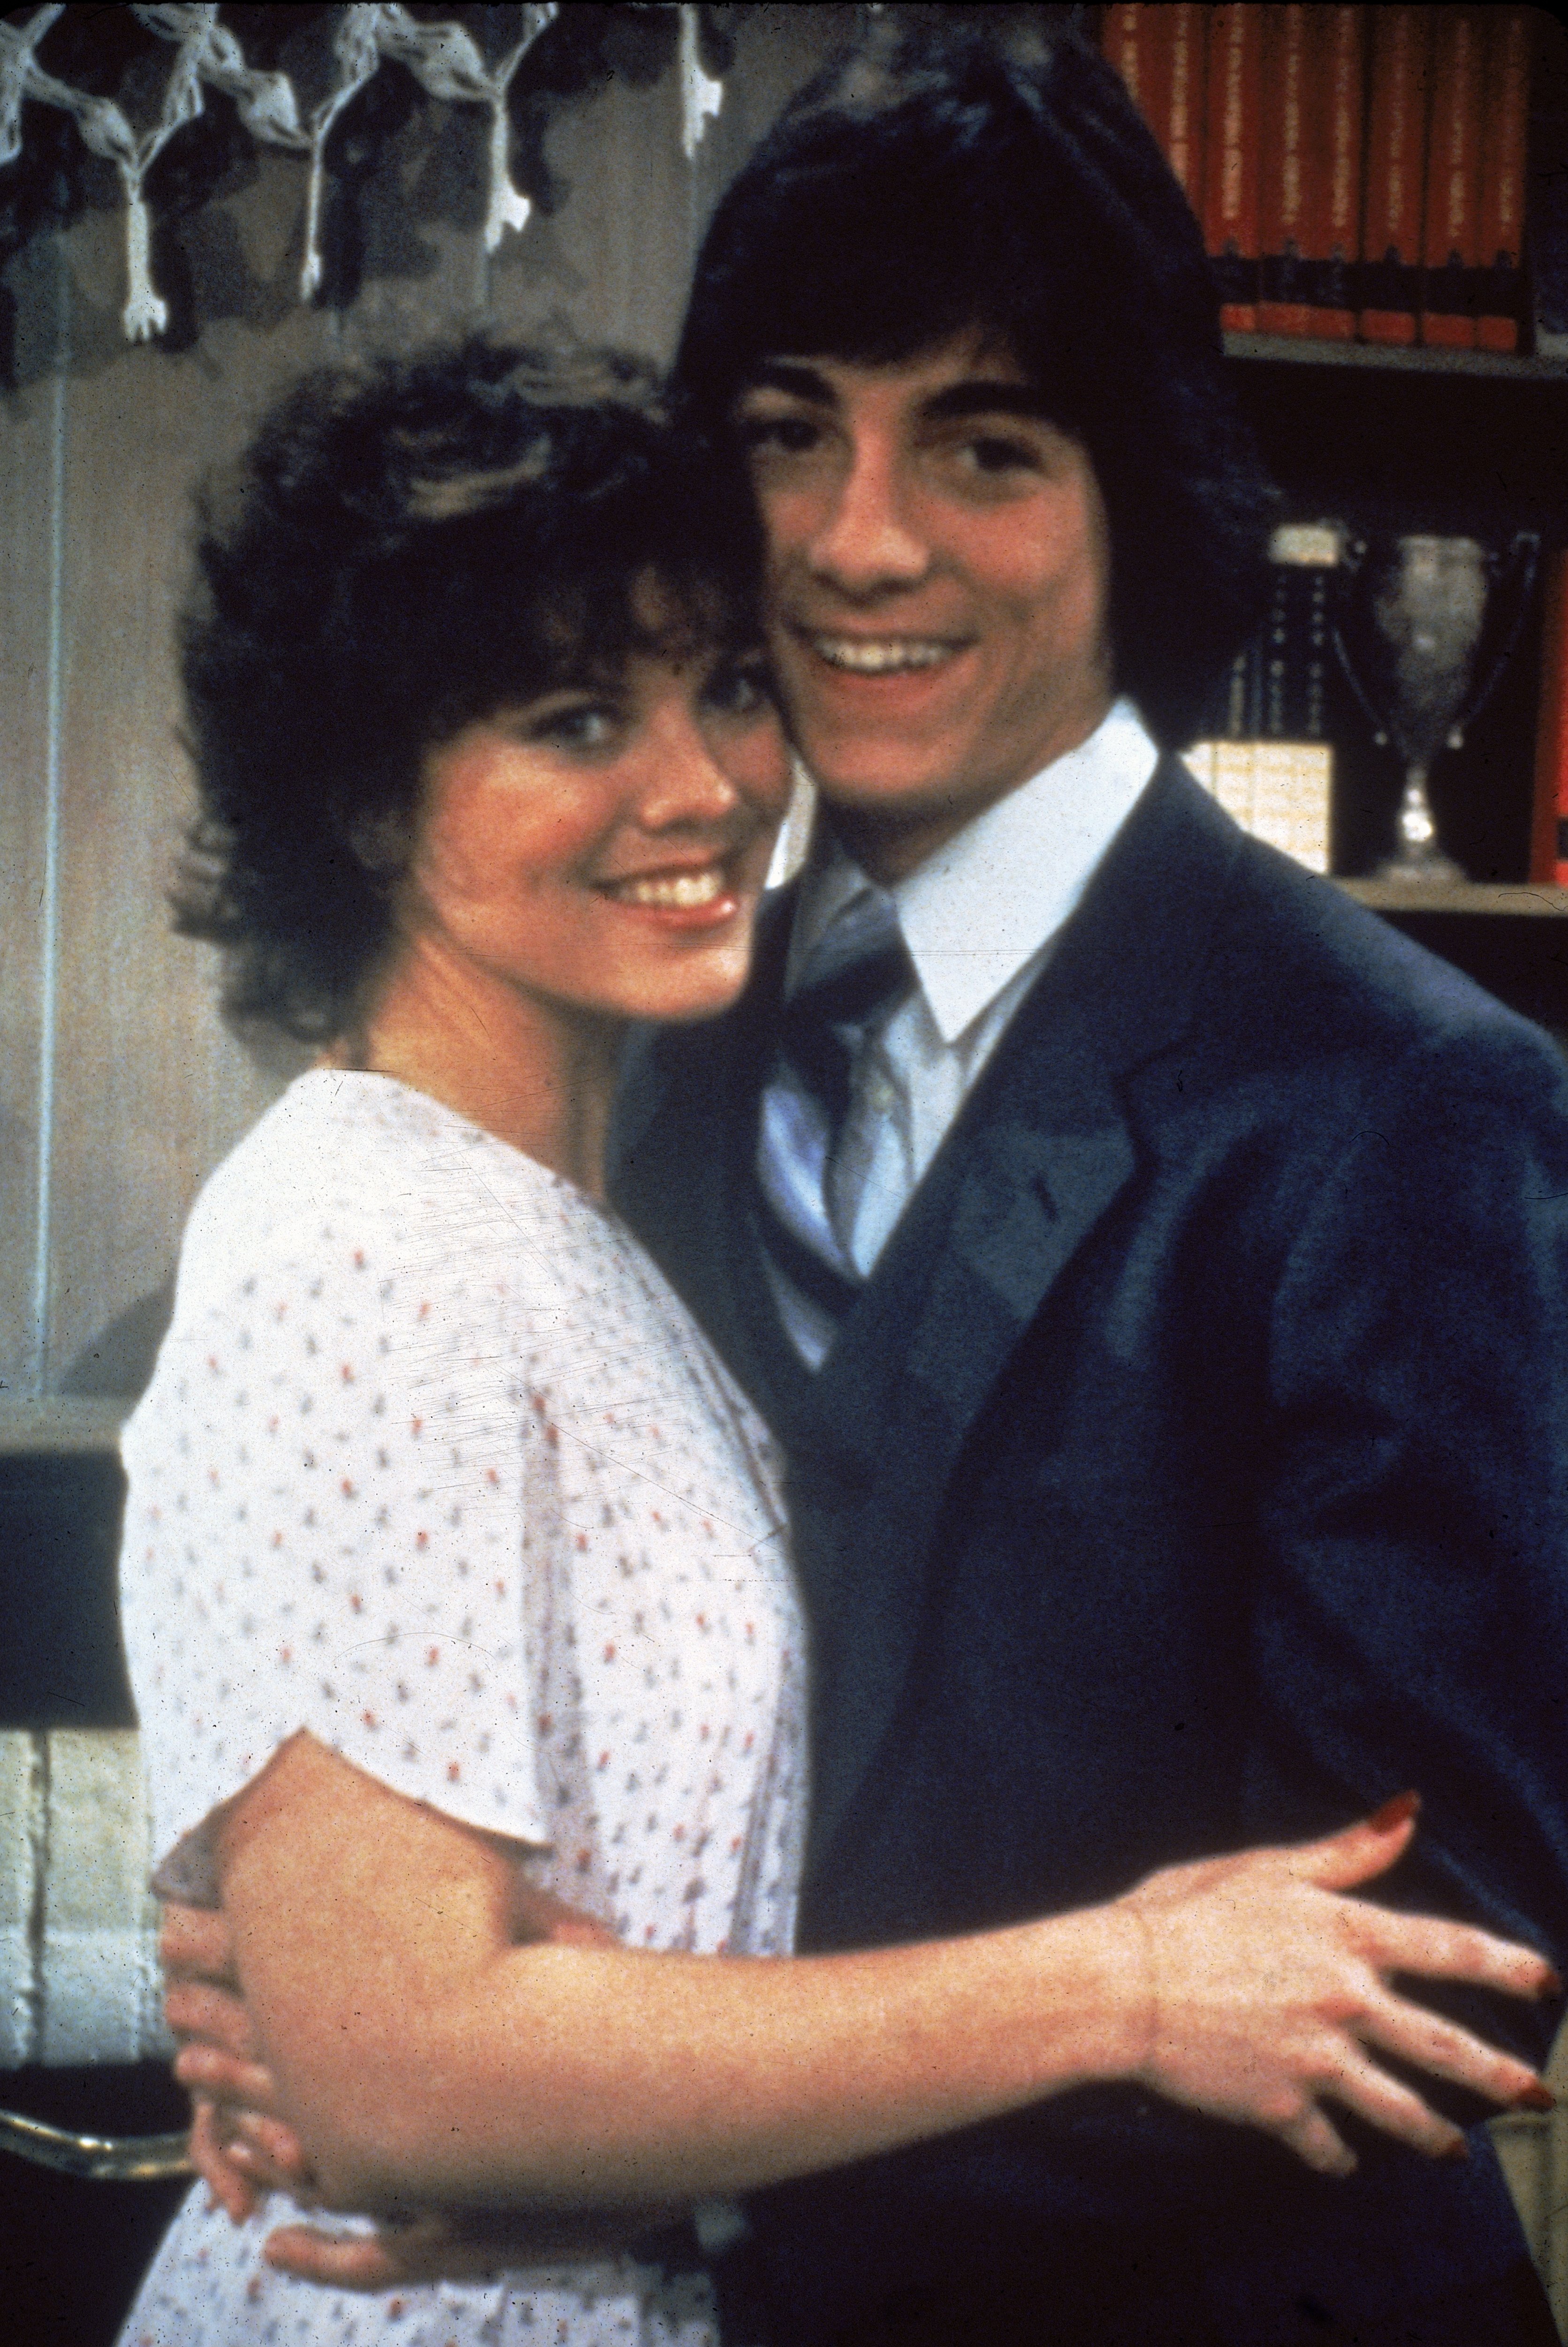 Actress Erin Moran pictured with her co-star Scott Baio in an embrace for a publicity portrait for the TV show "Joanie Loves Chachi," in 1982. / Source: Getty Images